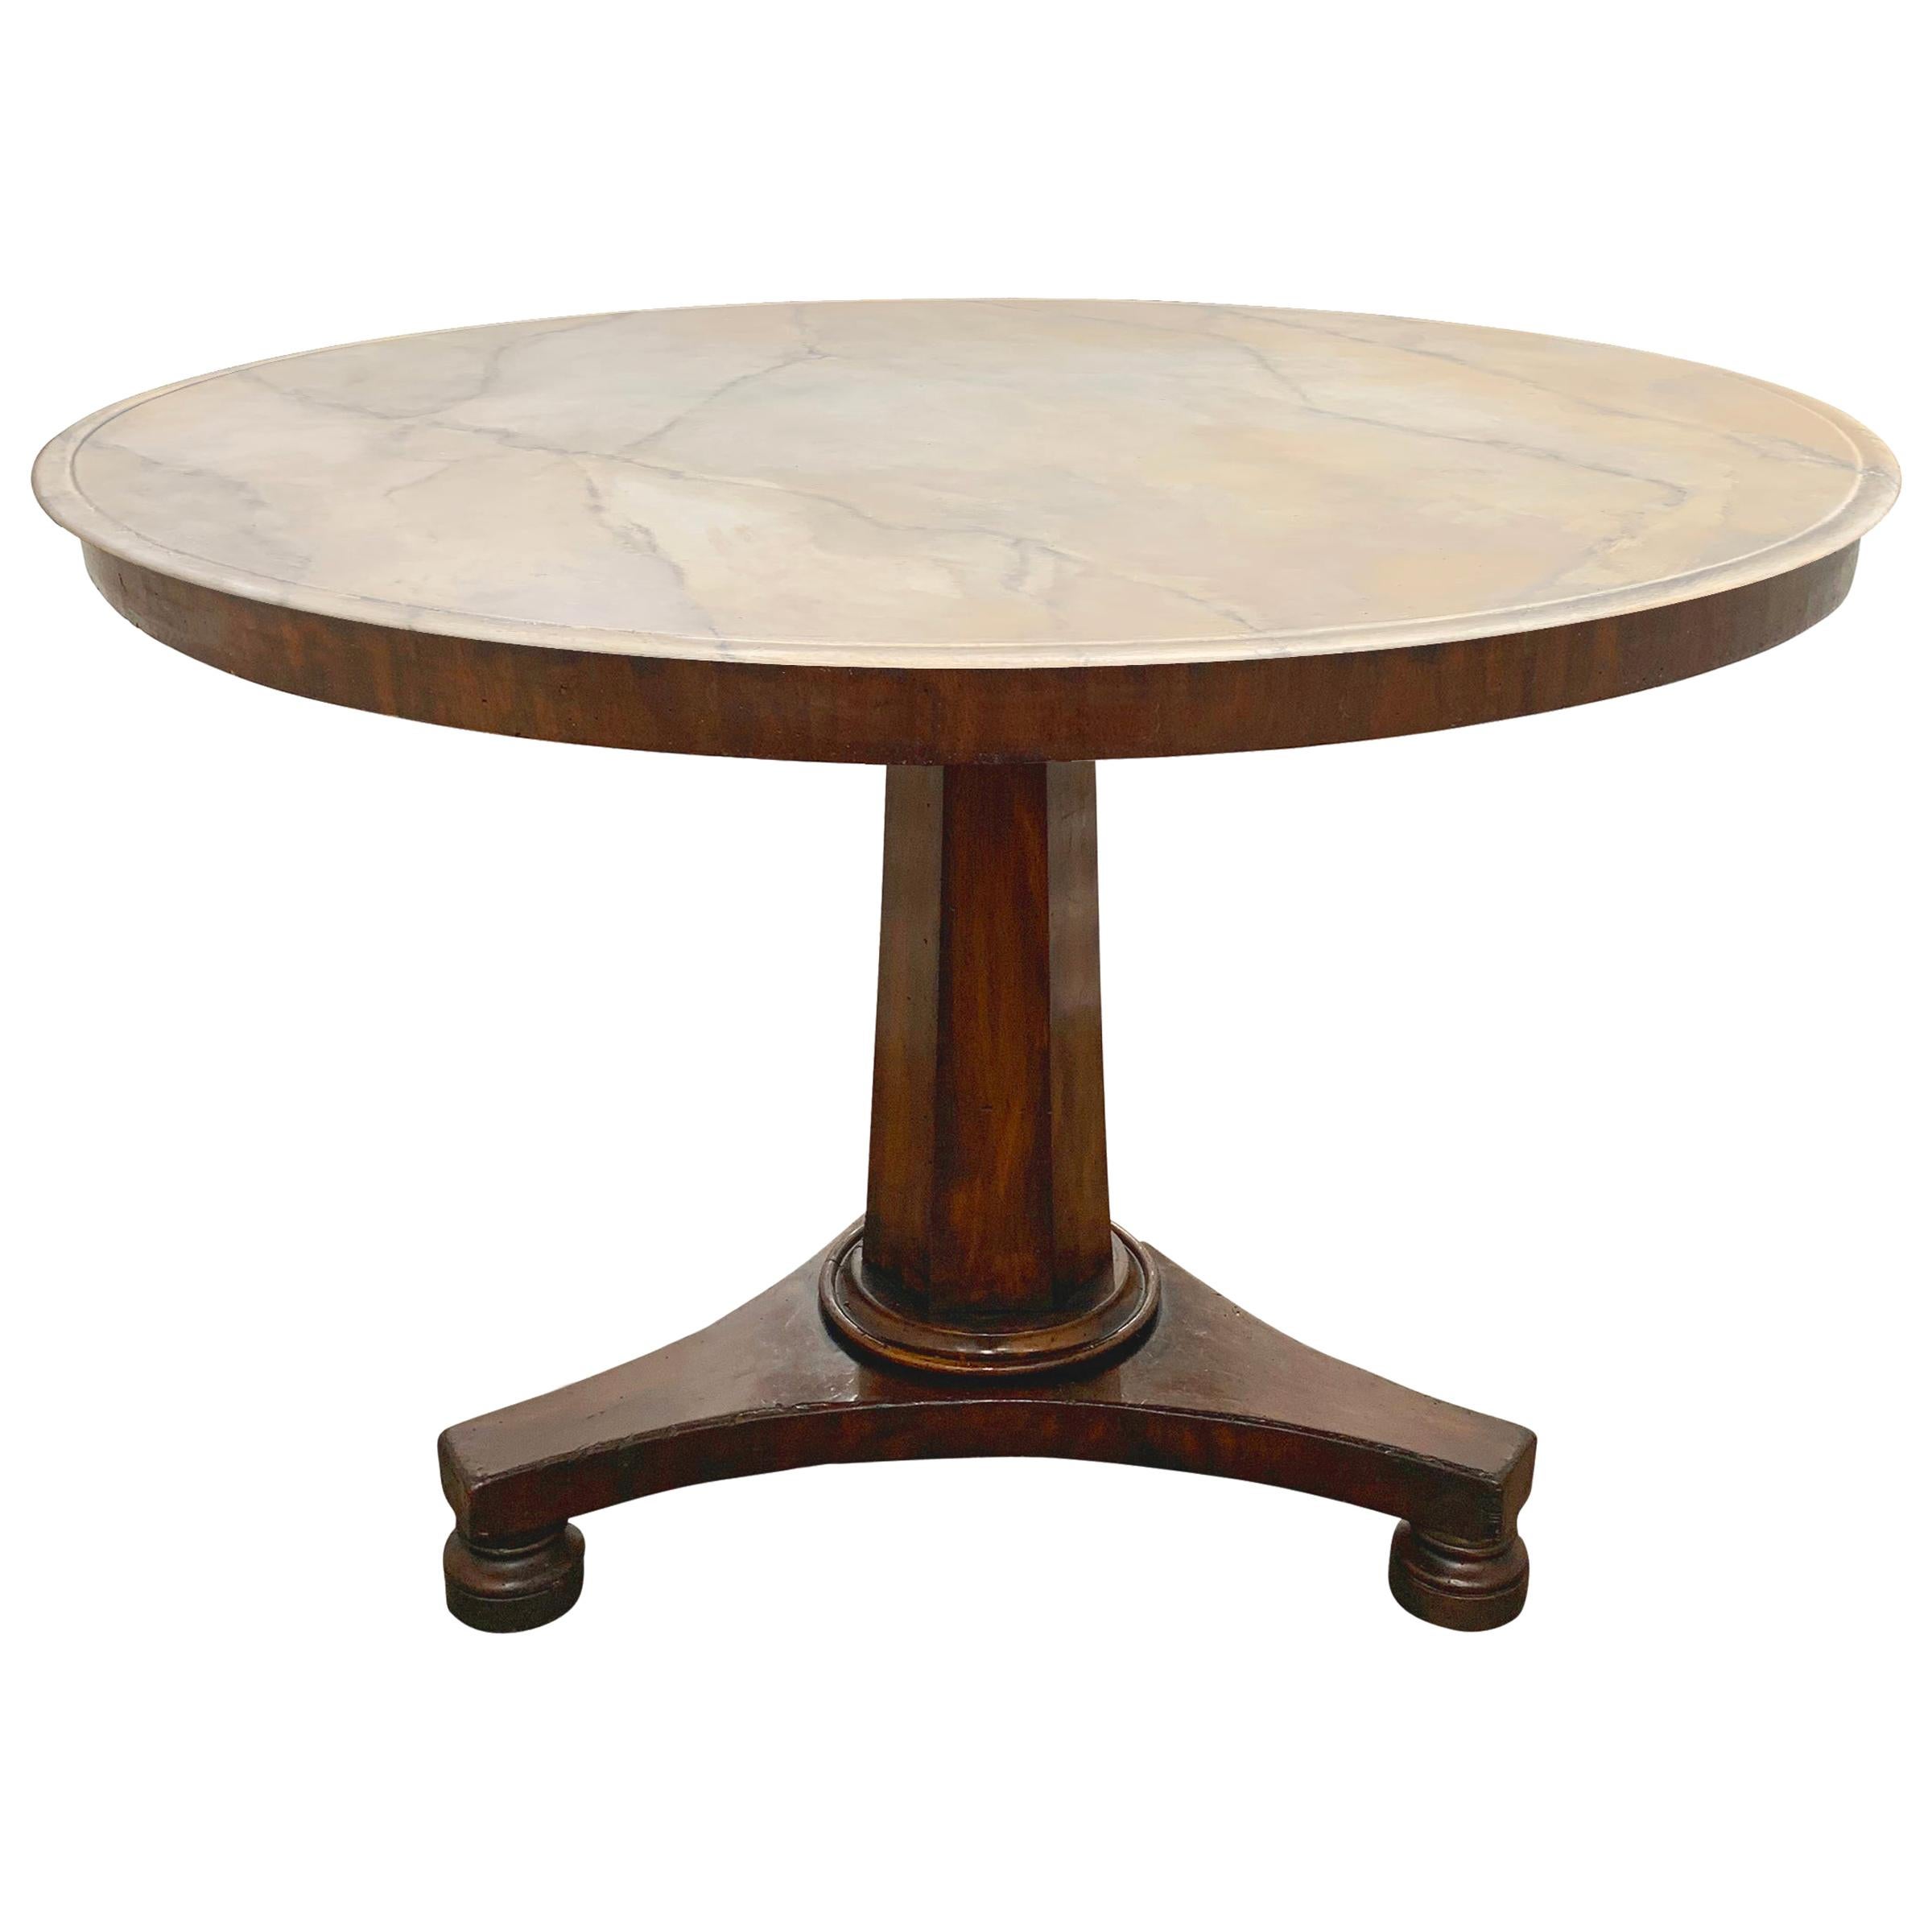 English Regency Period Faux Painted Marble-Top Center Table